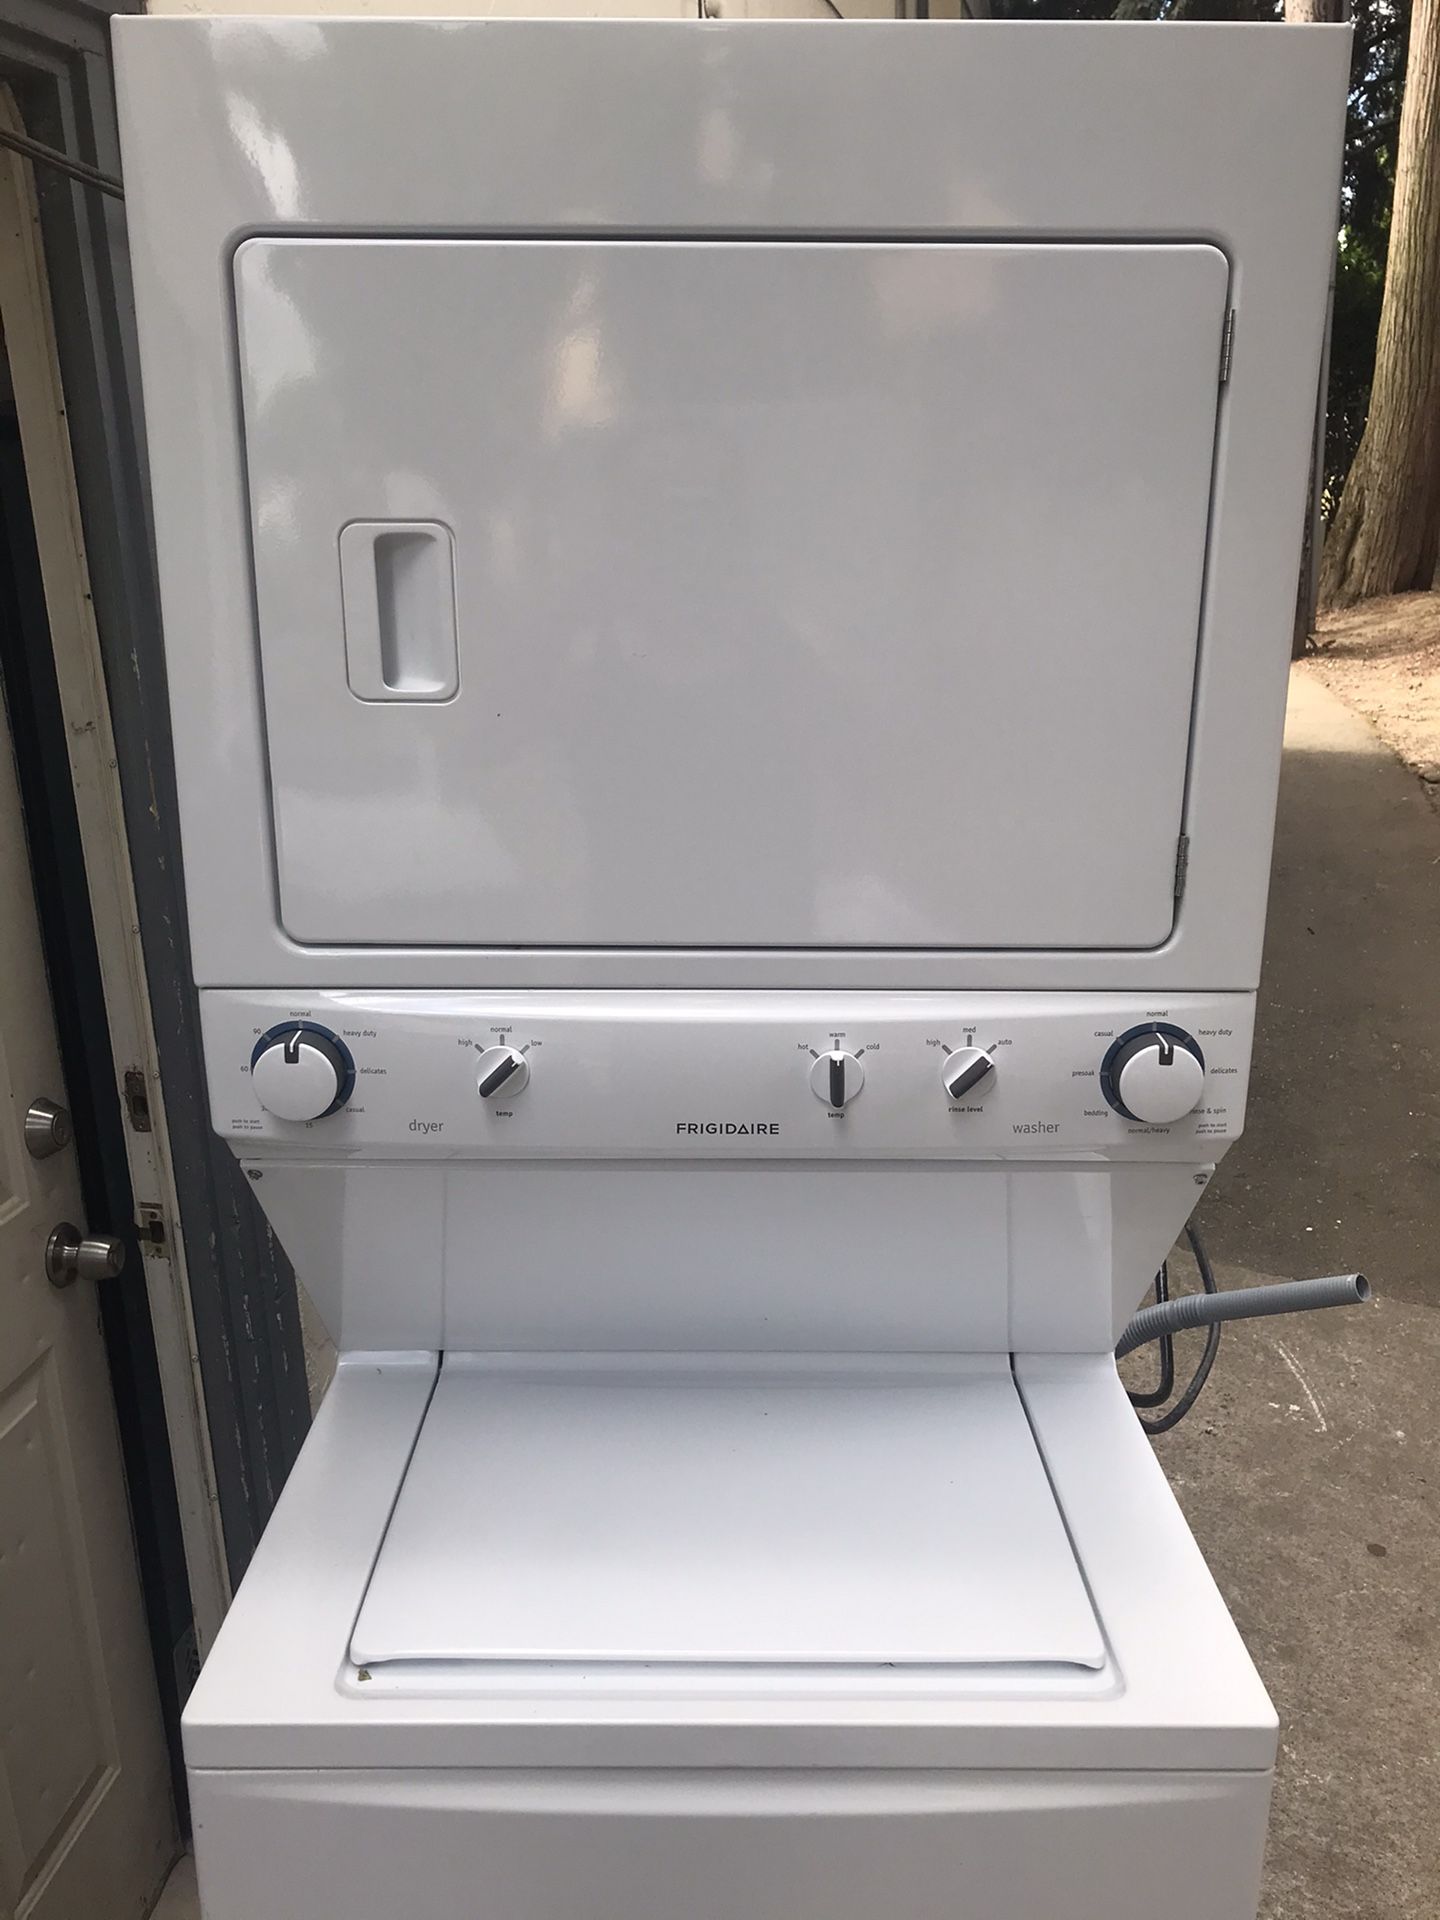 27” Frigidaire stackable washer and dryer